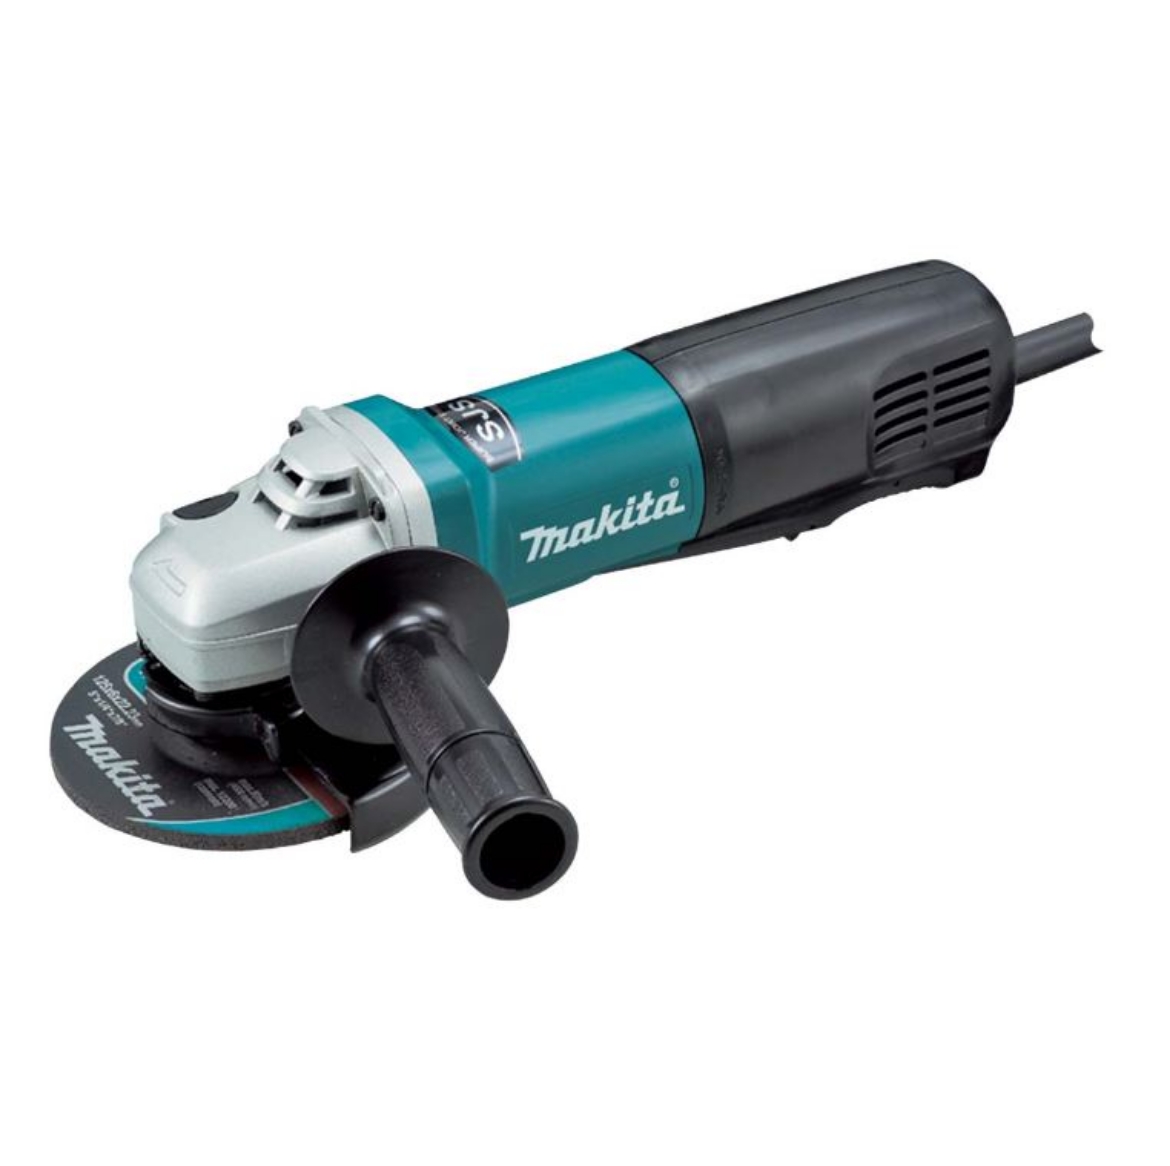 Picture of MAKITA Grinder 240V 125mm / 5" 1400W 2 Stage Paddle Switch